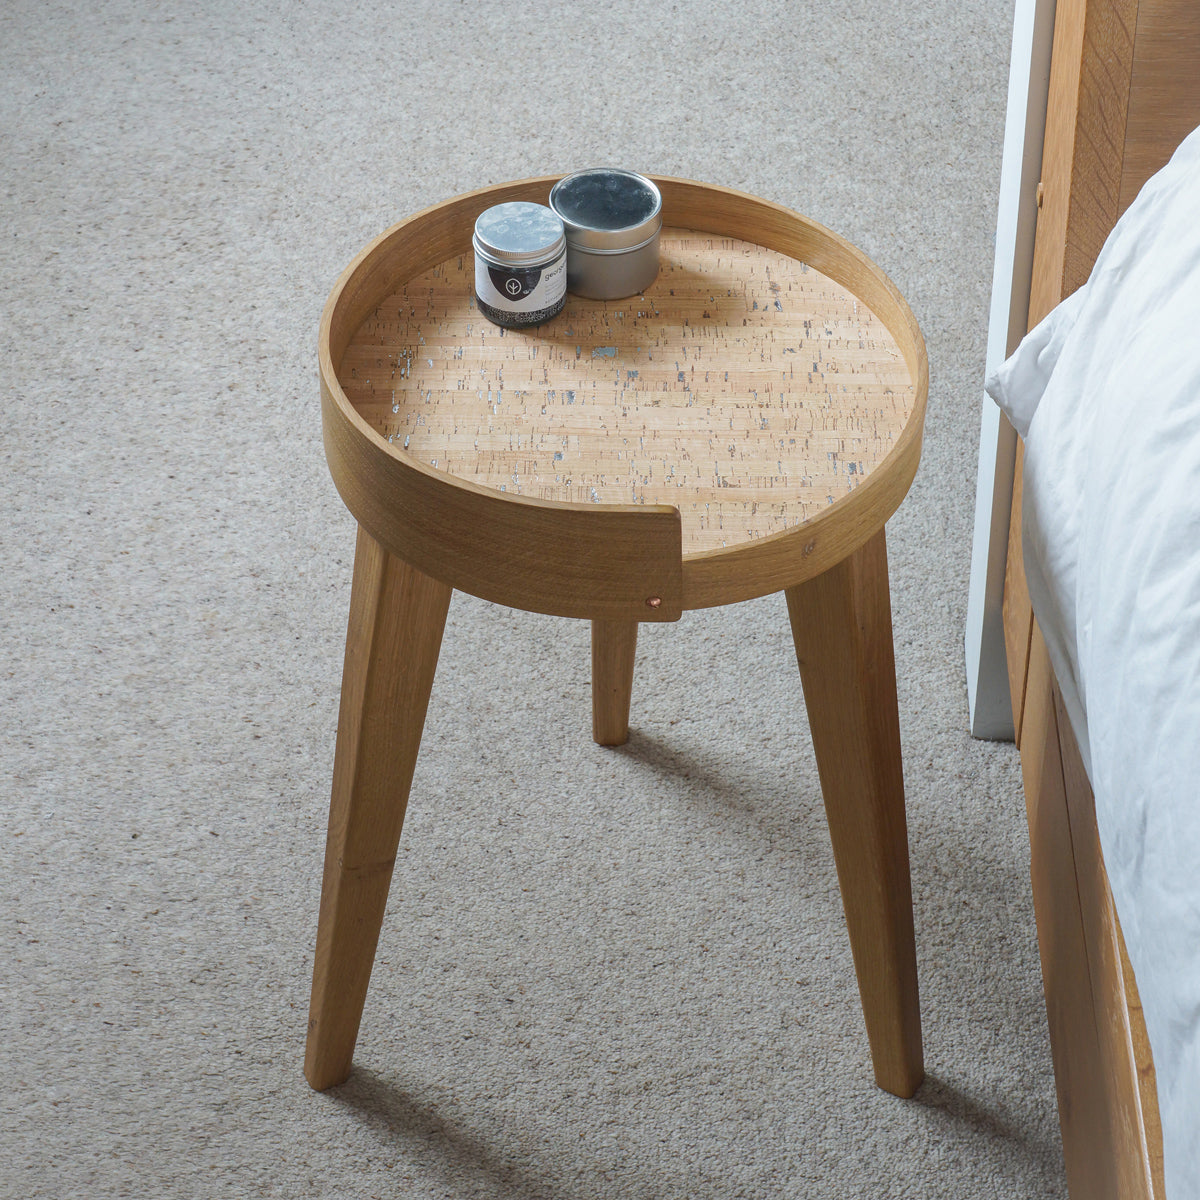 Small bed side table. LayerTree.